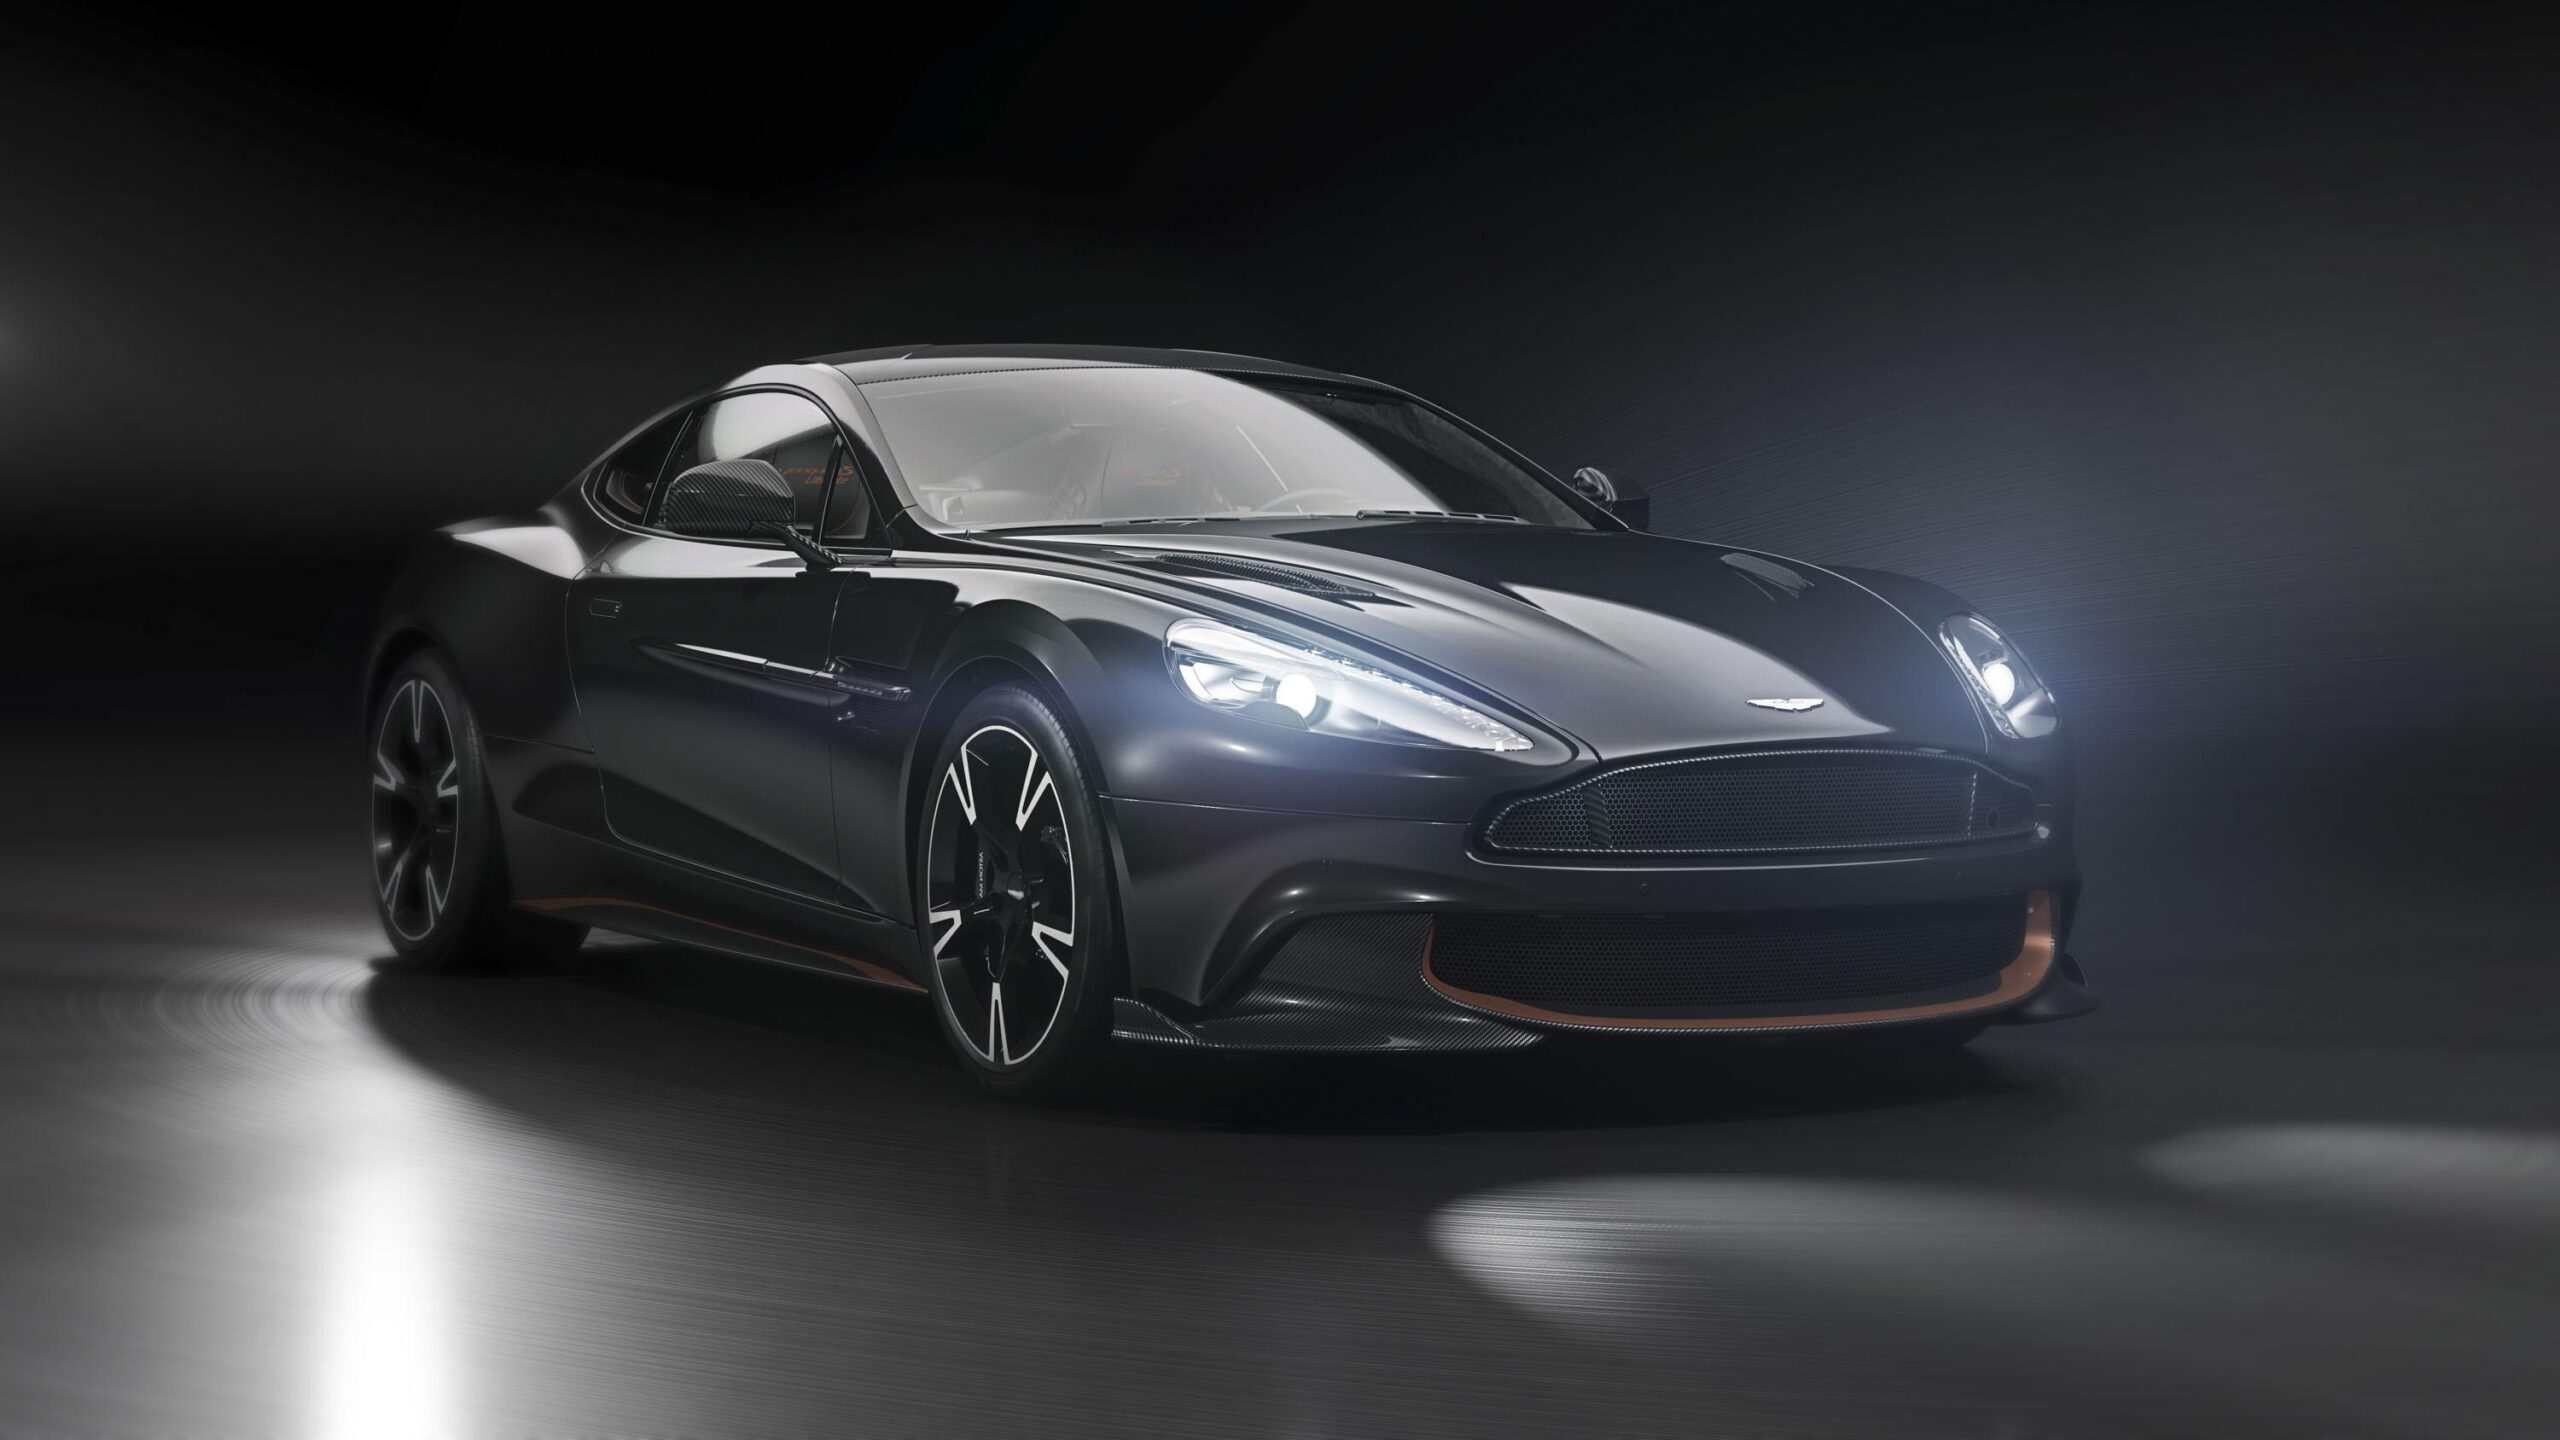 Aston Martin Vanquish S Ultimate Pictures, Photos, Wallpapers